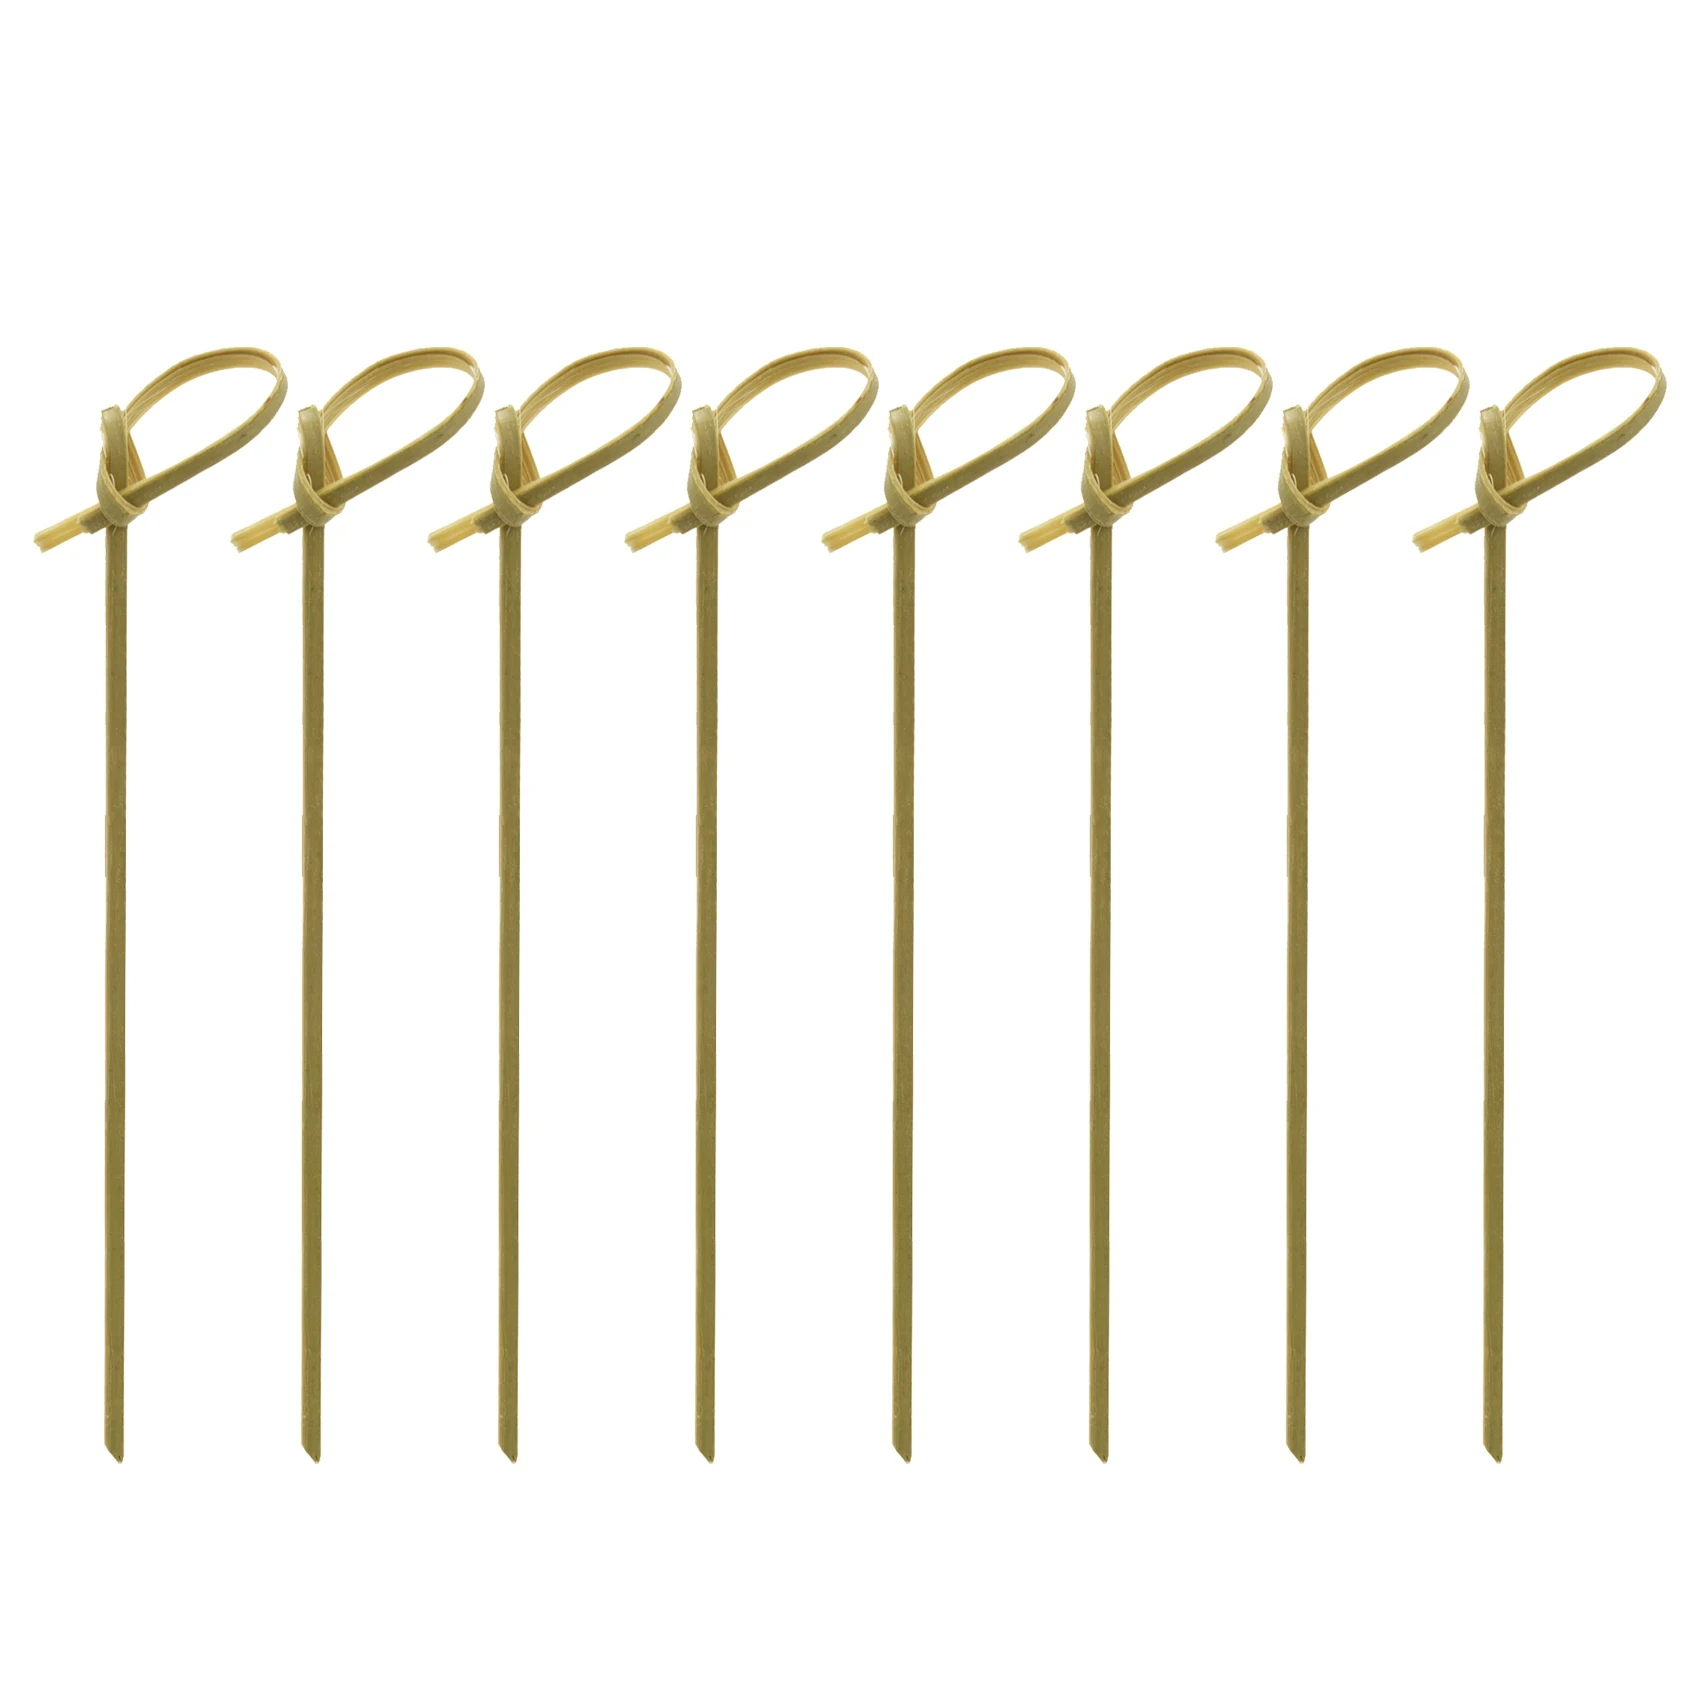 

300 Pack Bamboo Cocktail Picks Cocktail Toothpicks Bamboo Skewers Toothpicks for Appetizers 4 Inch